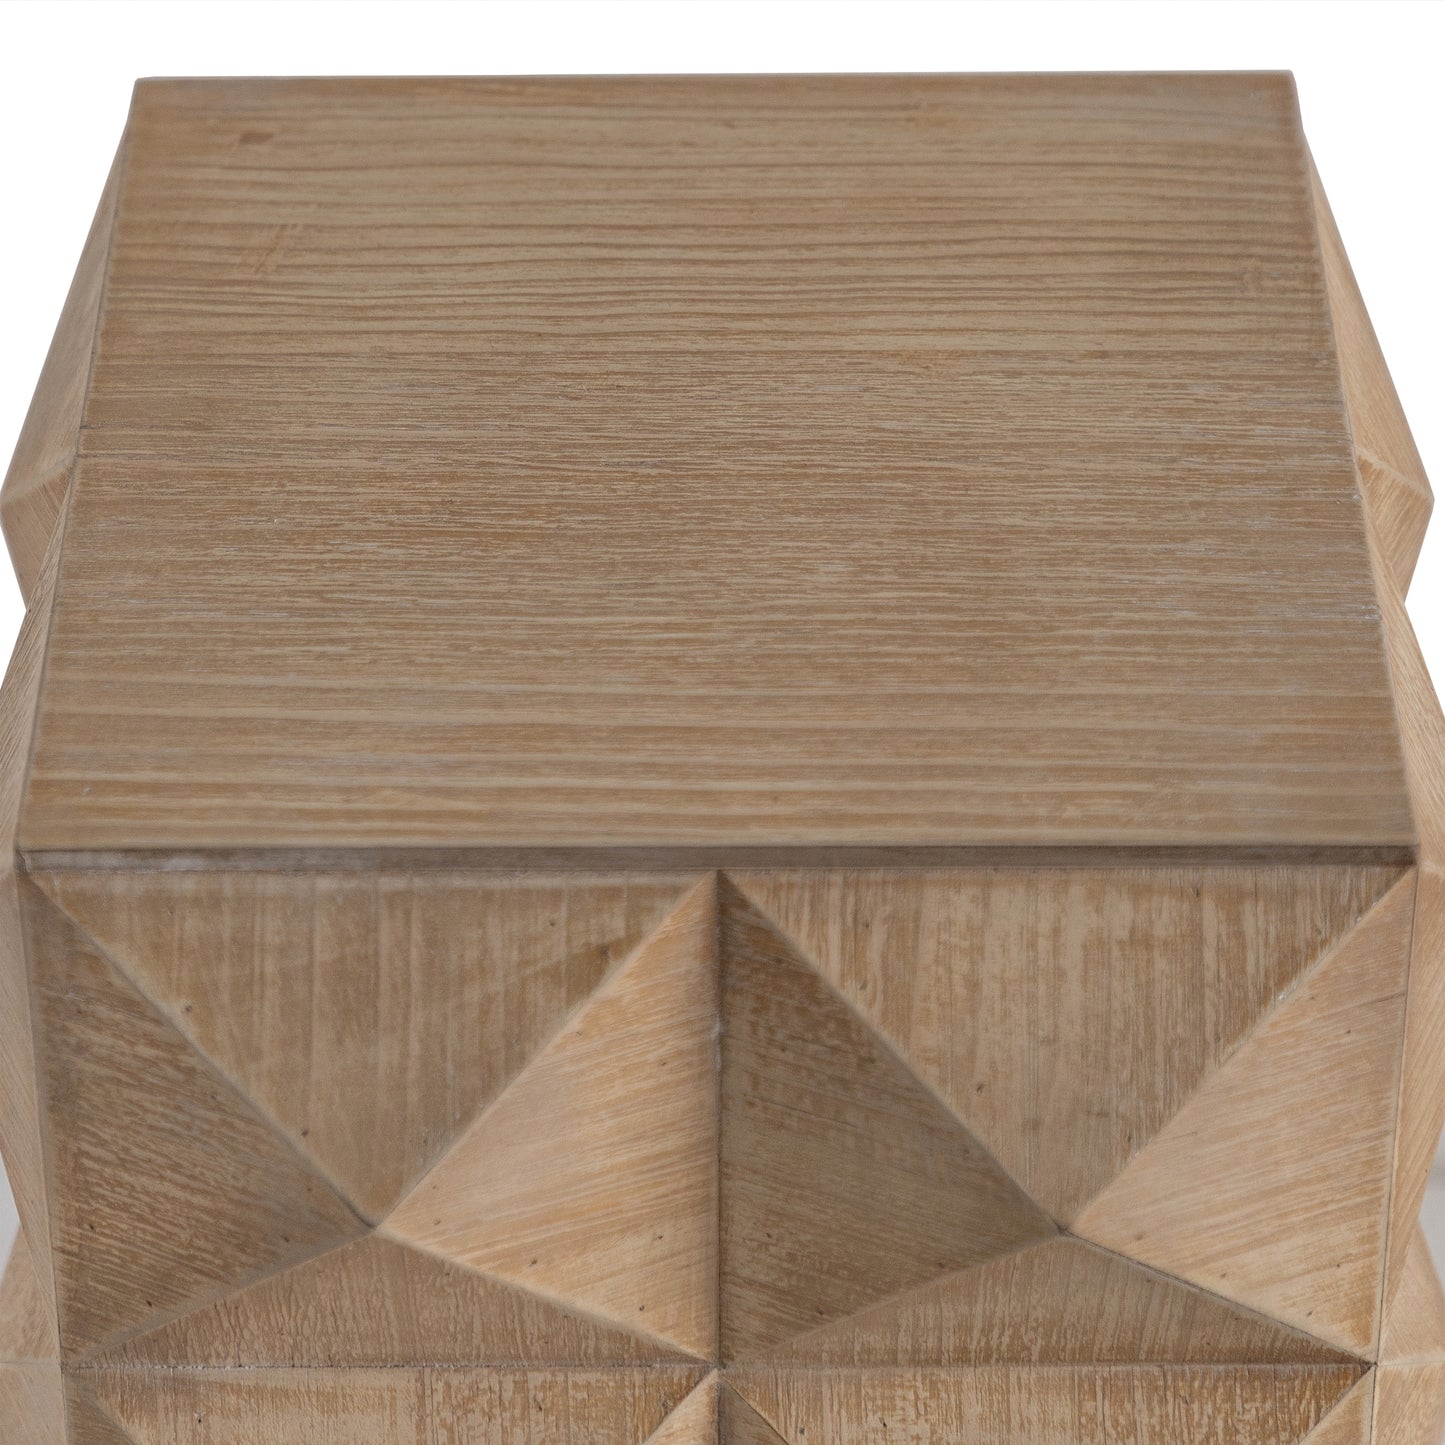 Three-dimensional Embossed  Pattern Design End Table